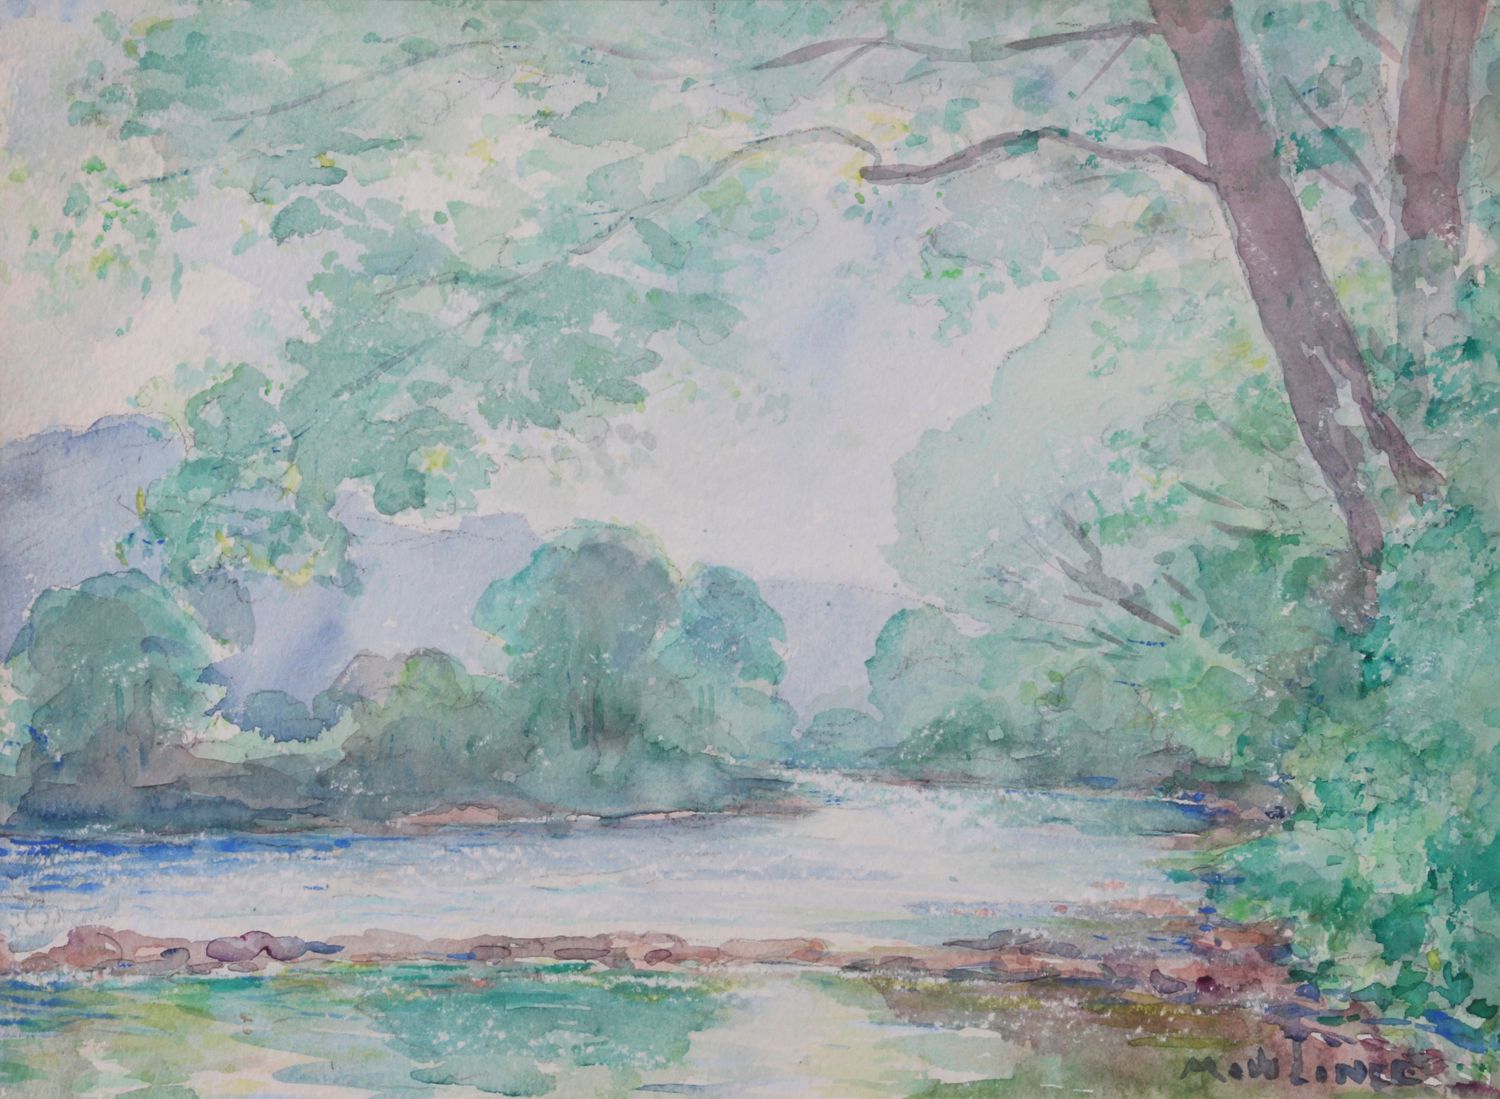 Marcel DE LINCÉ. "Corner of the Ourthe" Watercolor, 25 x 34. Signed lower right.&hellip;